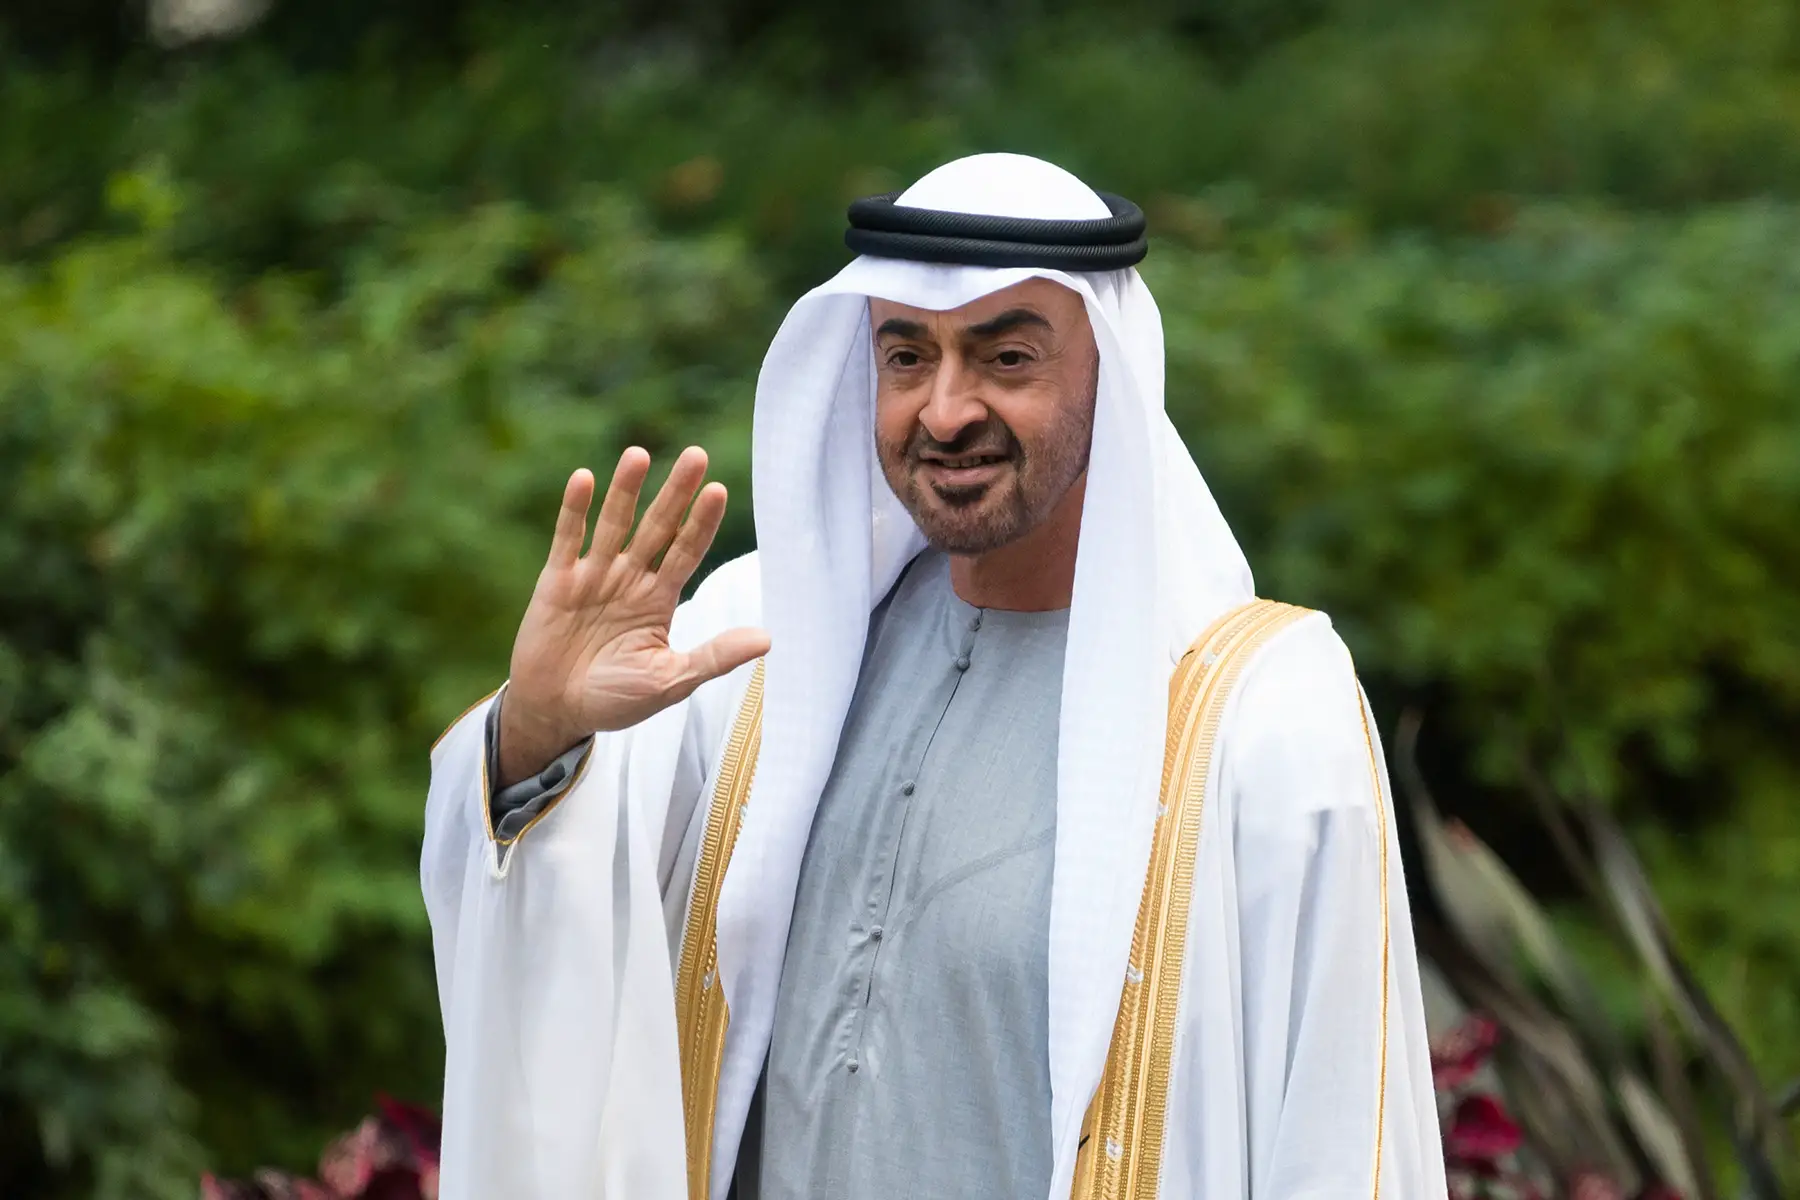 Crown Prince Sheikh Mohammed bin Zayed Al Nahyan waving while standing in front of some greenery